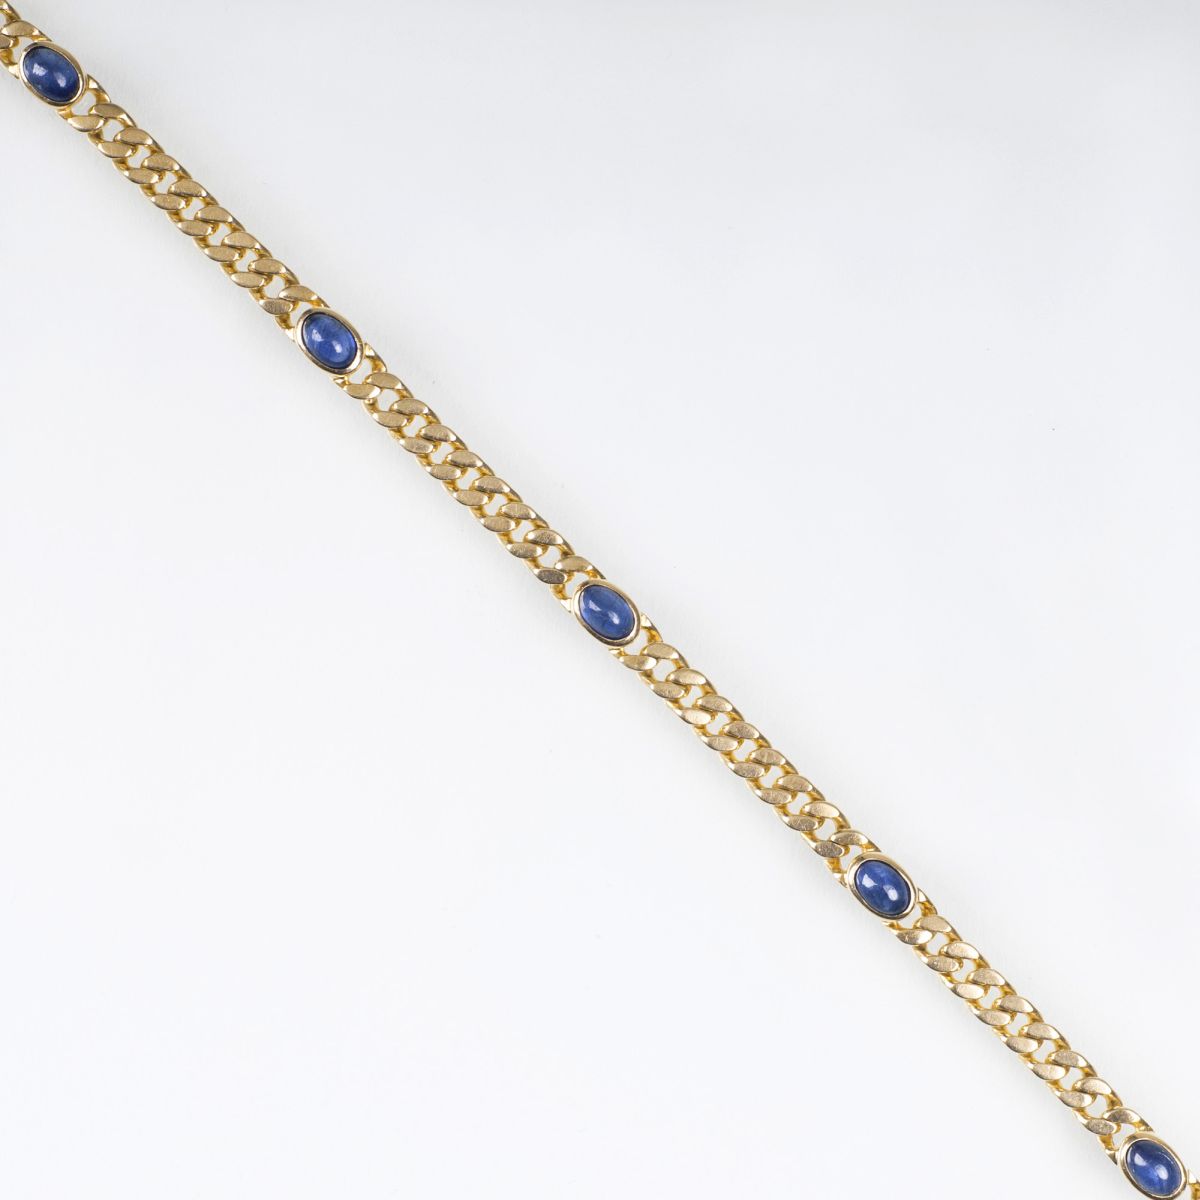 A Gold Bracelet with Sapphires